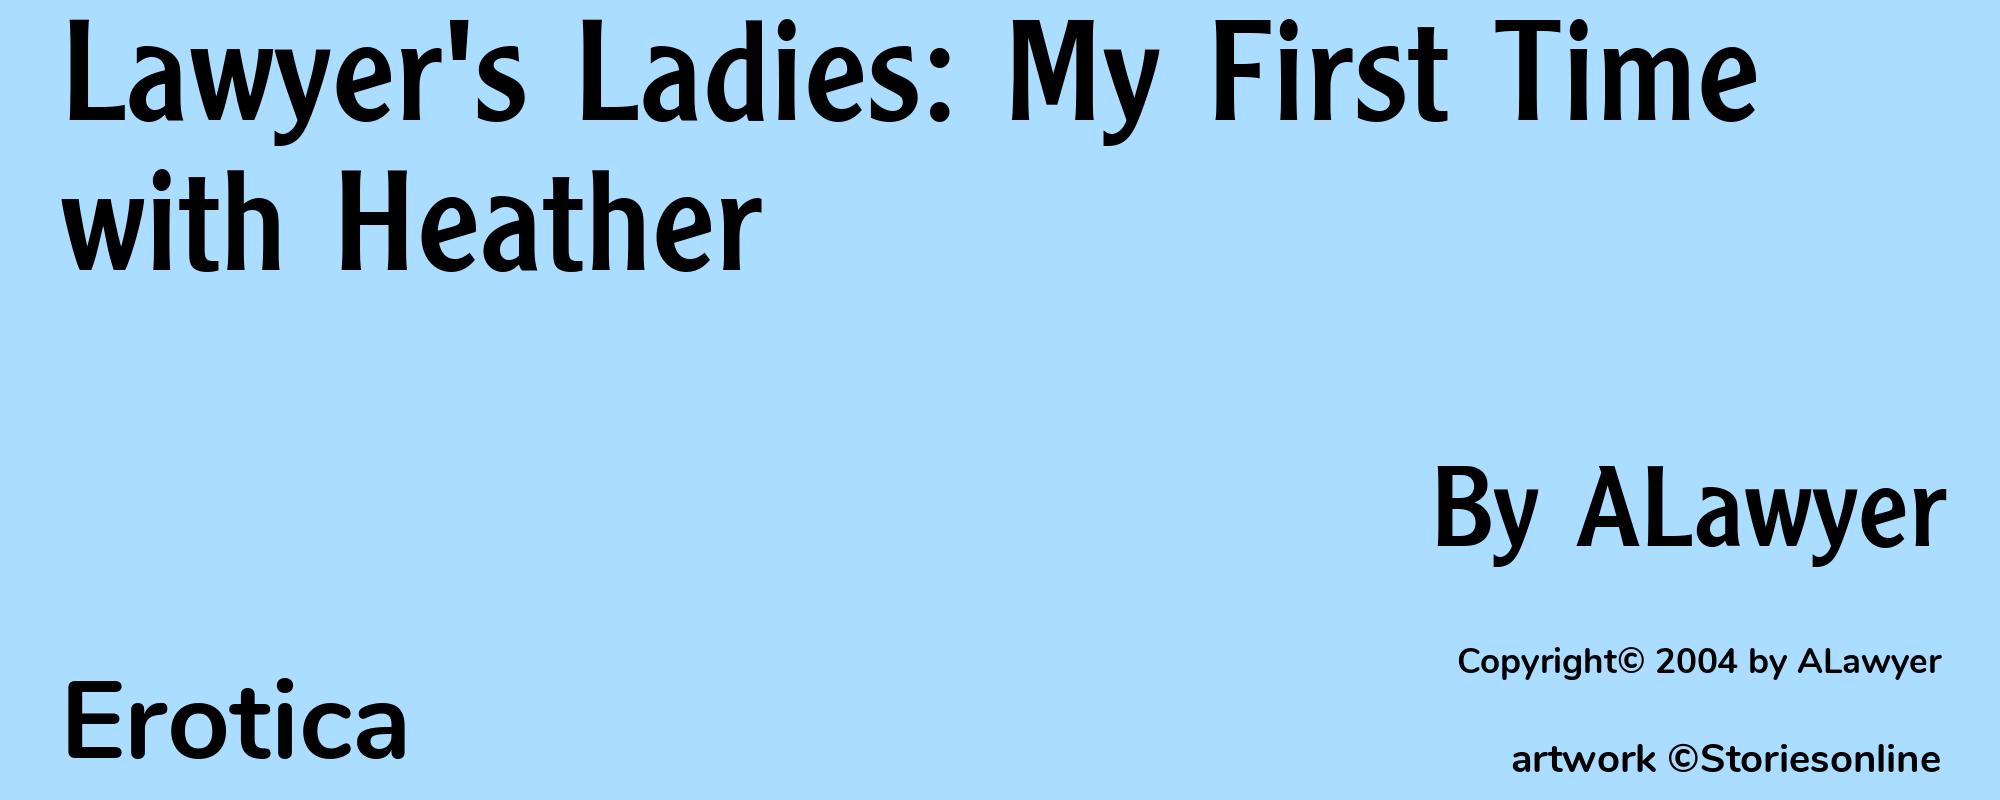 Lawyer's Ladies: My First Time with Heather - Cover